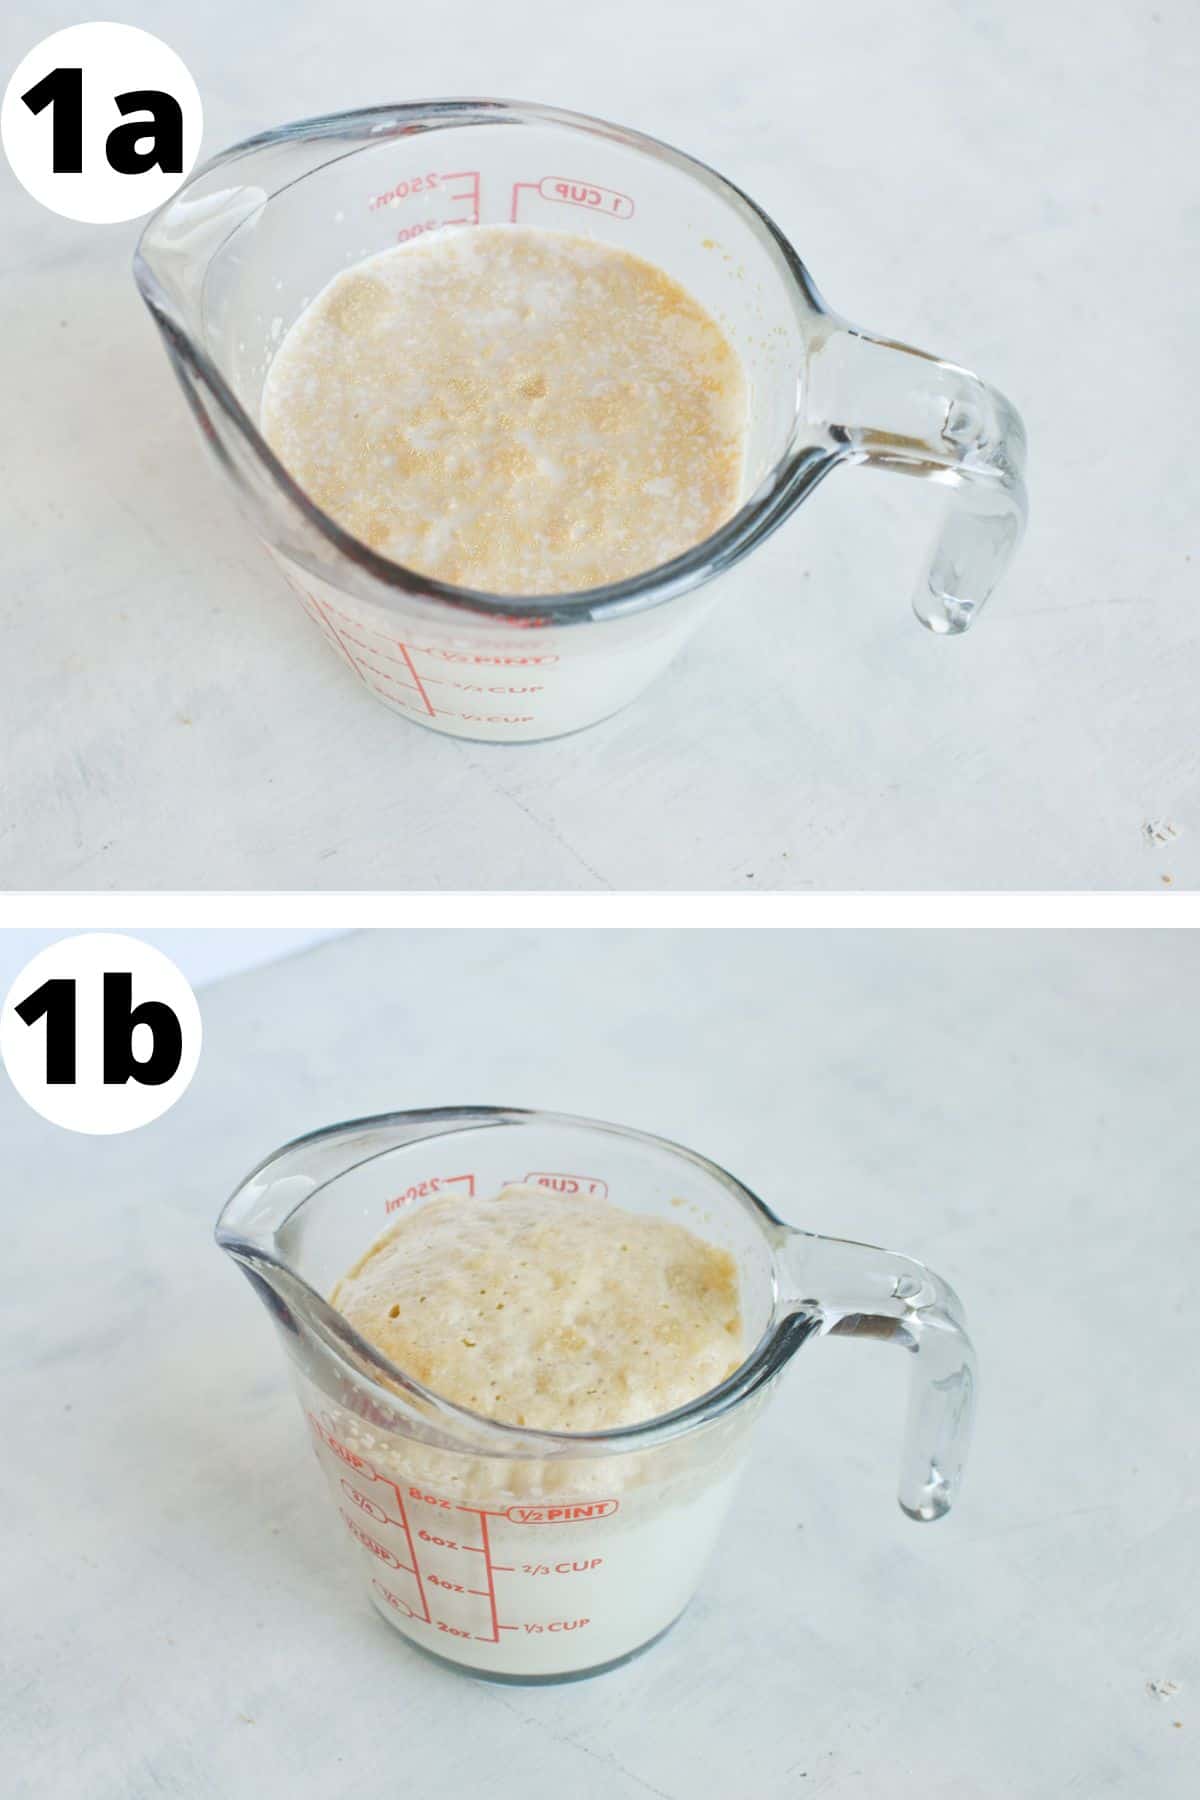 two images showing how to bloom yeast. 